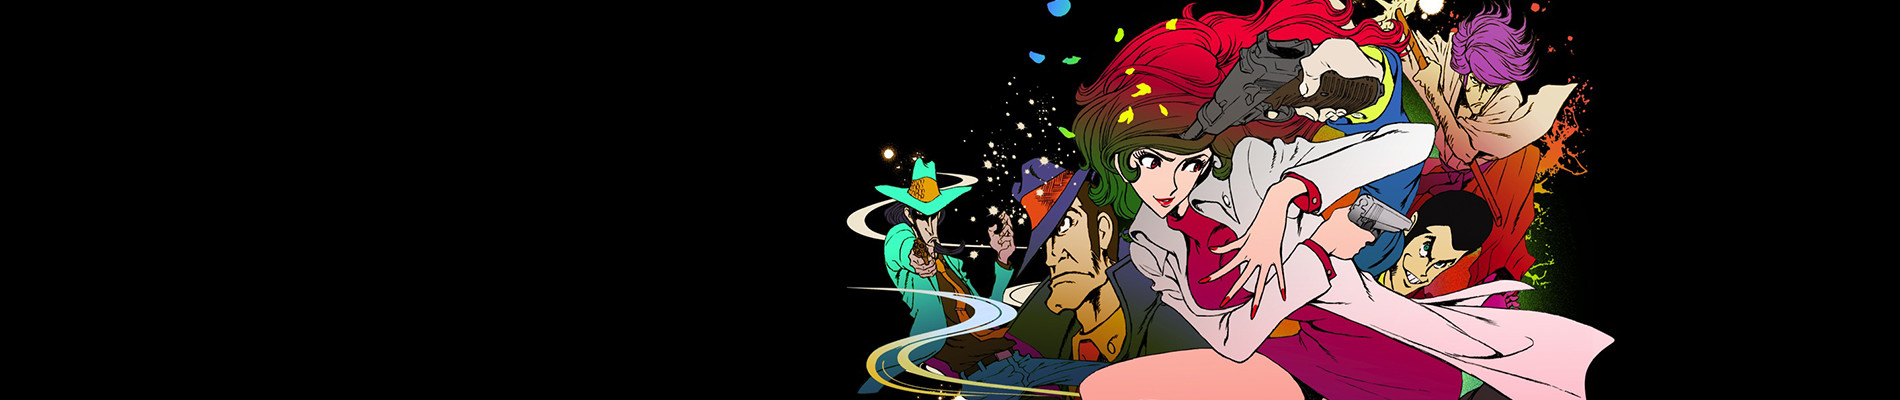 Banner for Lupin the Third: The Woman Called Fujiko Mine